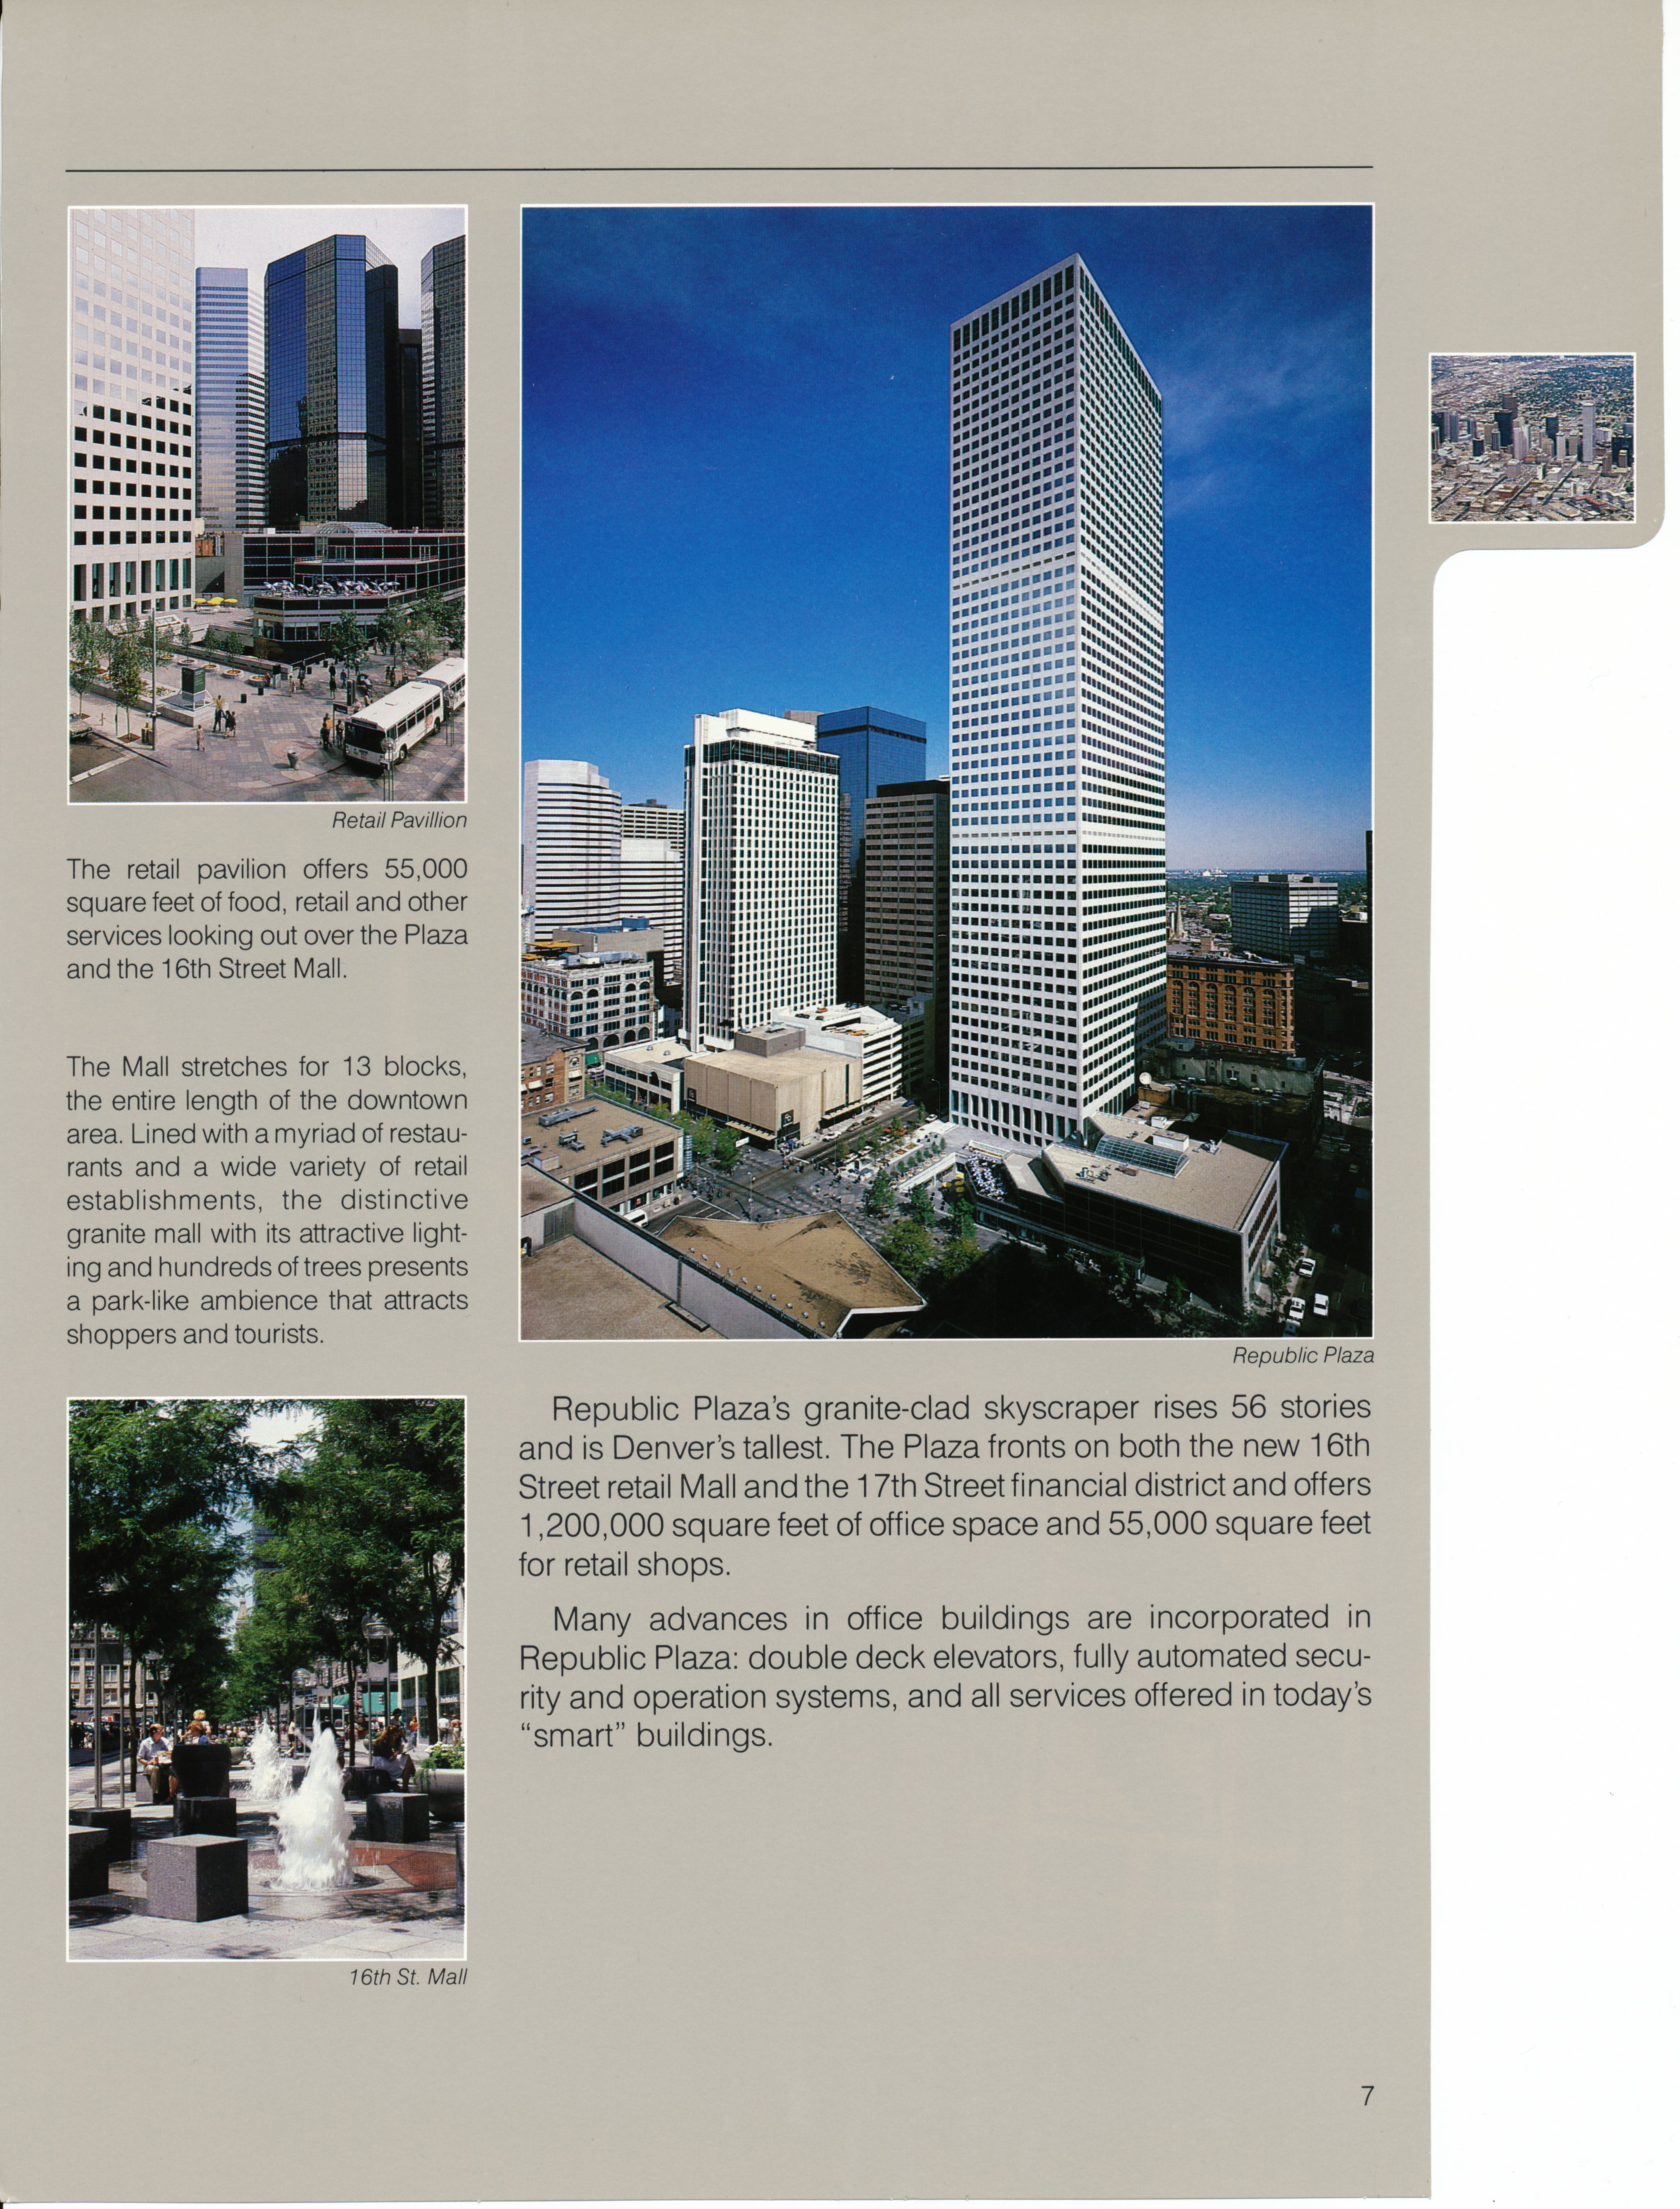 Brochure page for Republic Plaza, featuring aerial and interior images.